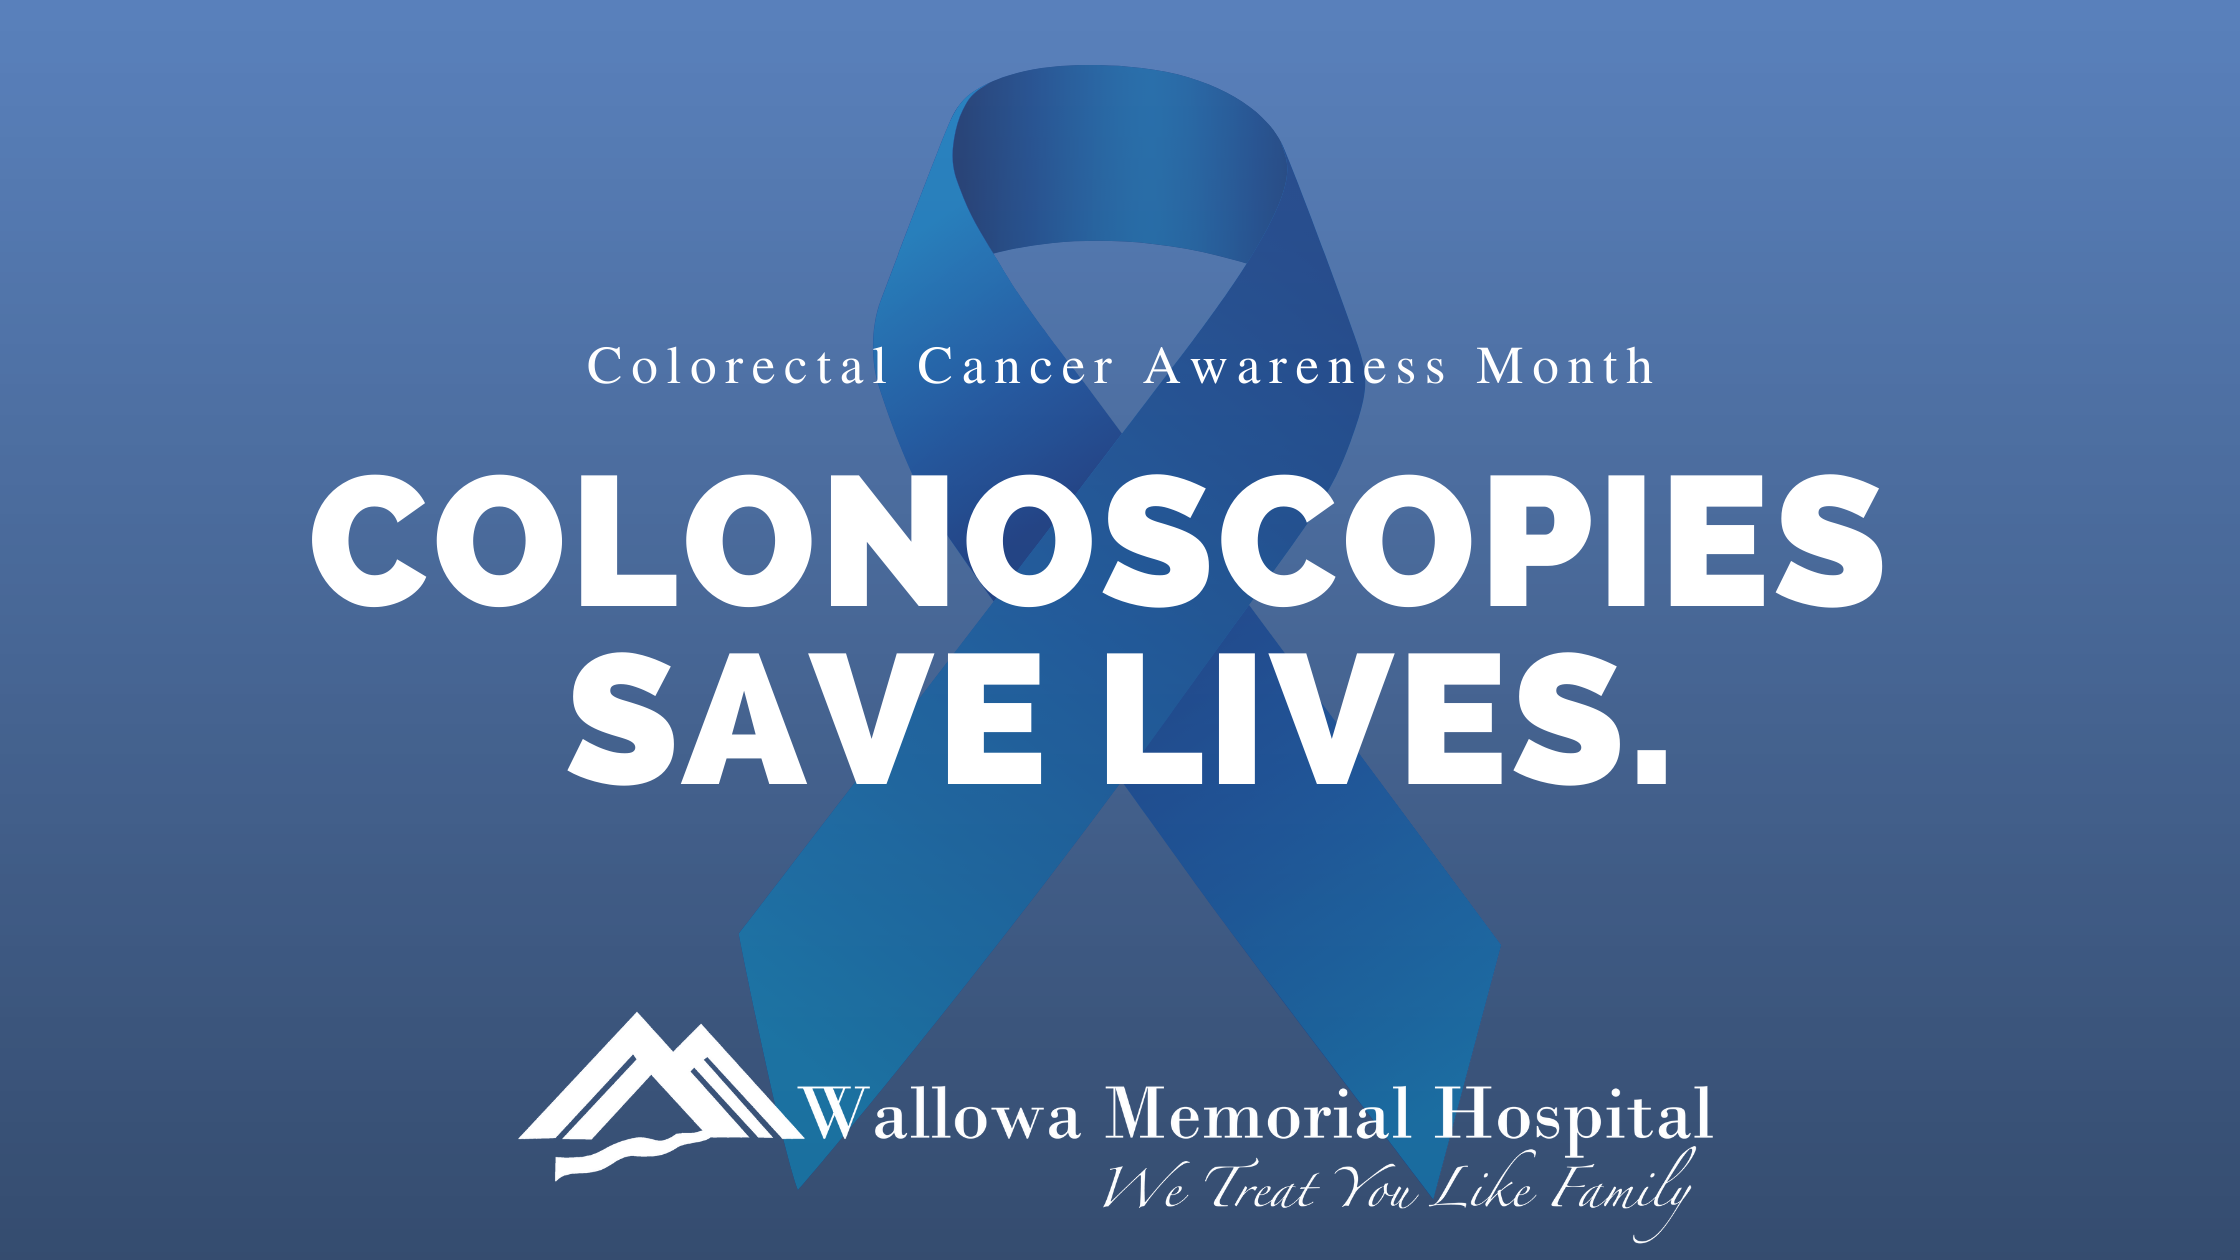 Colonscopies Save Lives